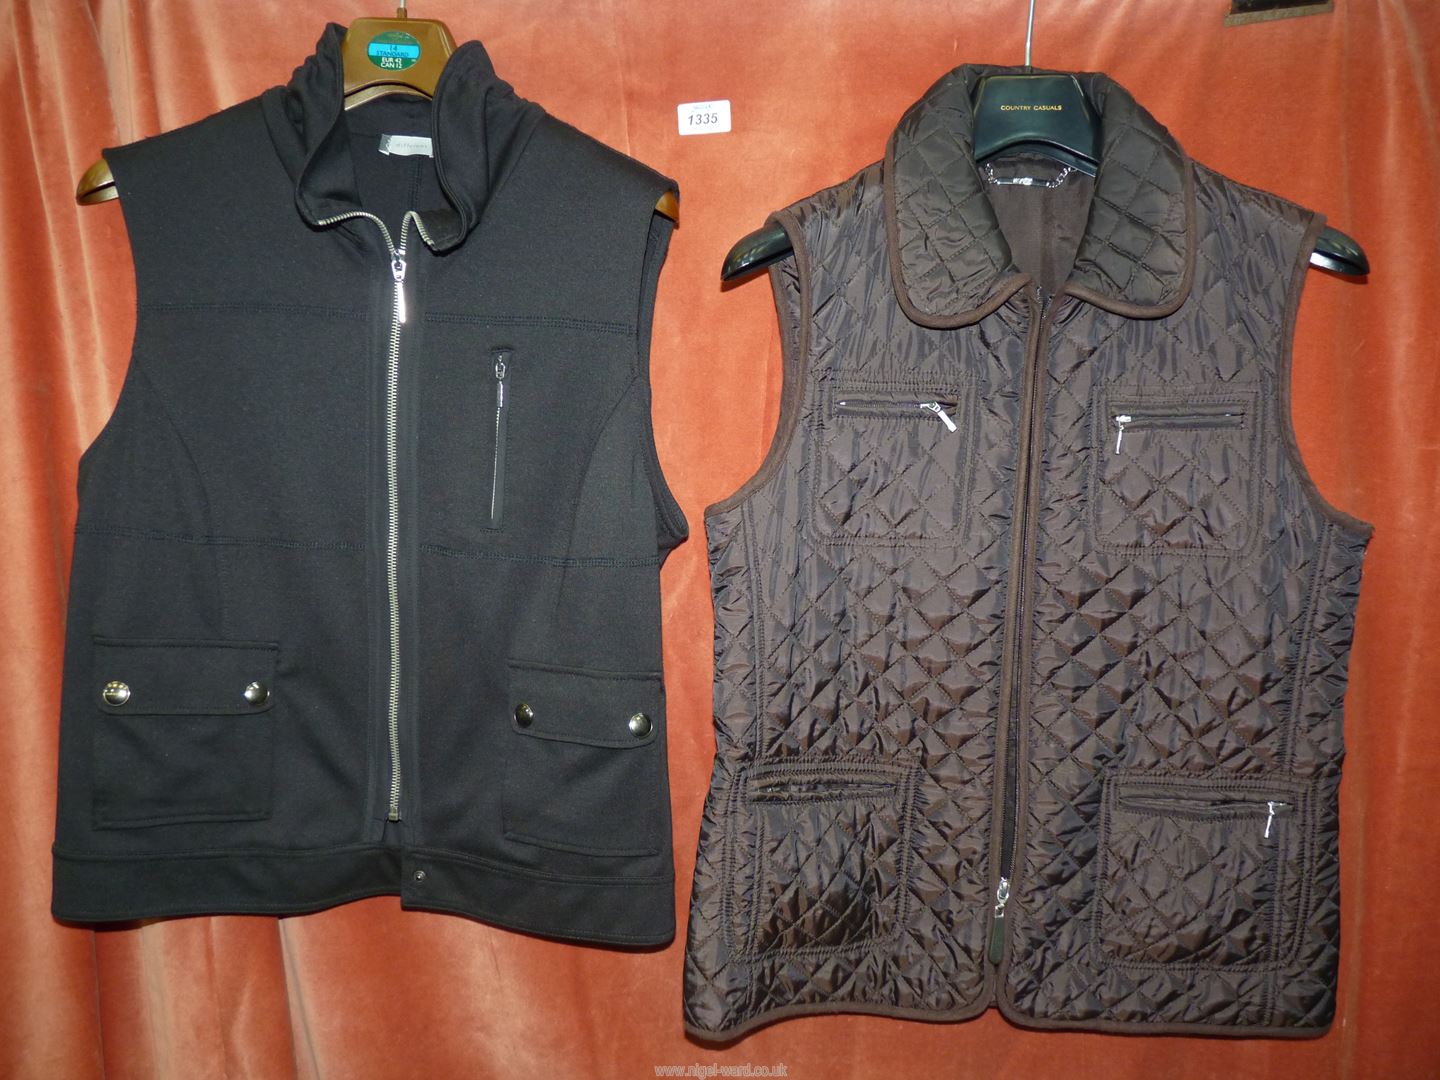 A 'Different' black gilet, UK size 40 and a 'Hobbs' black quilted gilet, size 10.